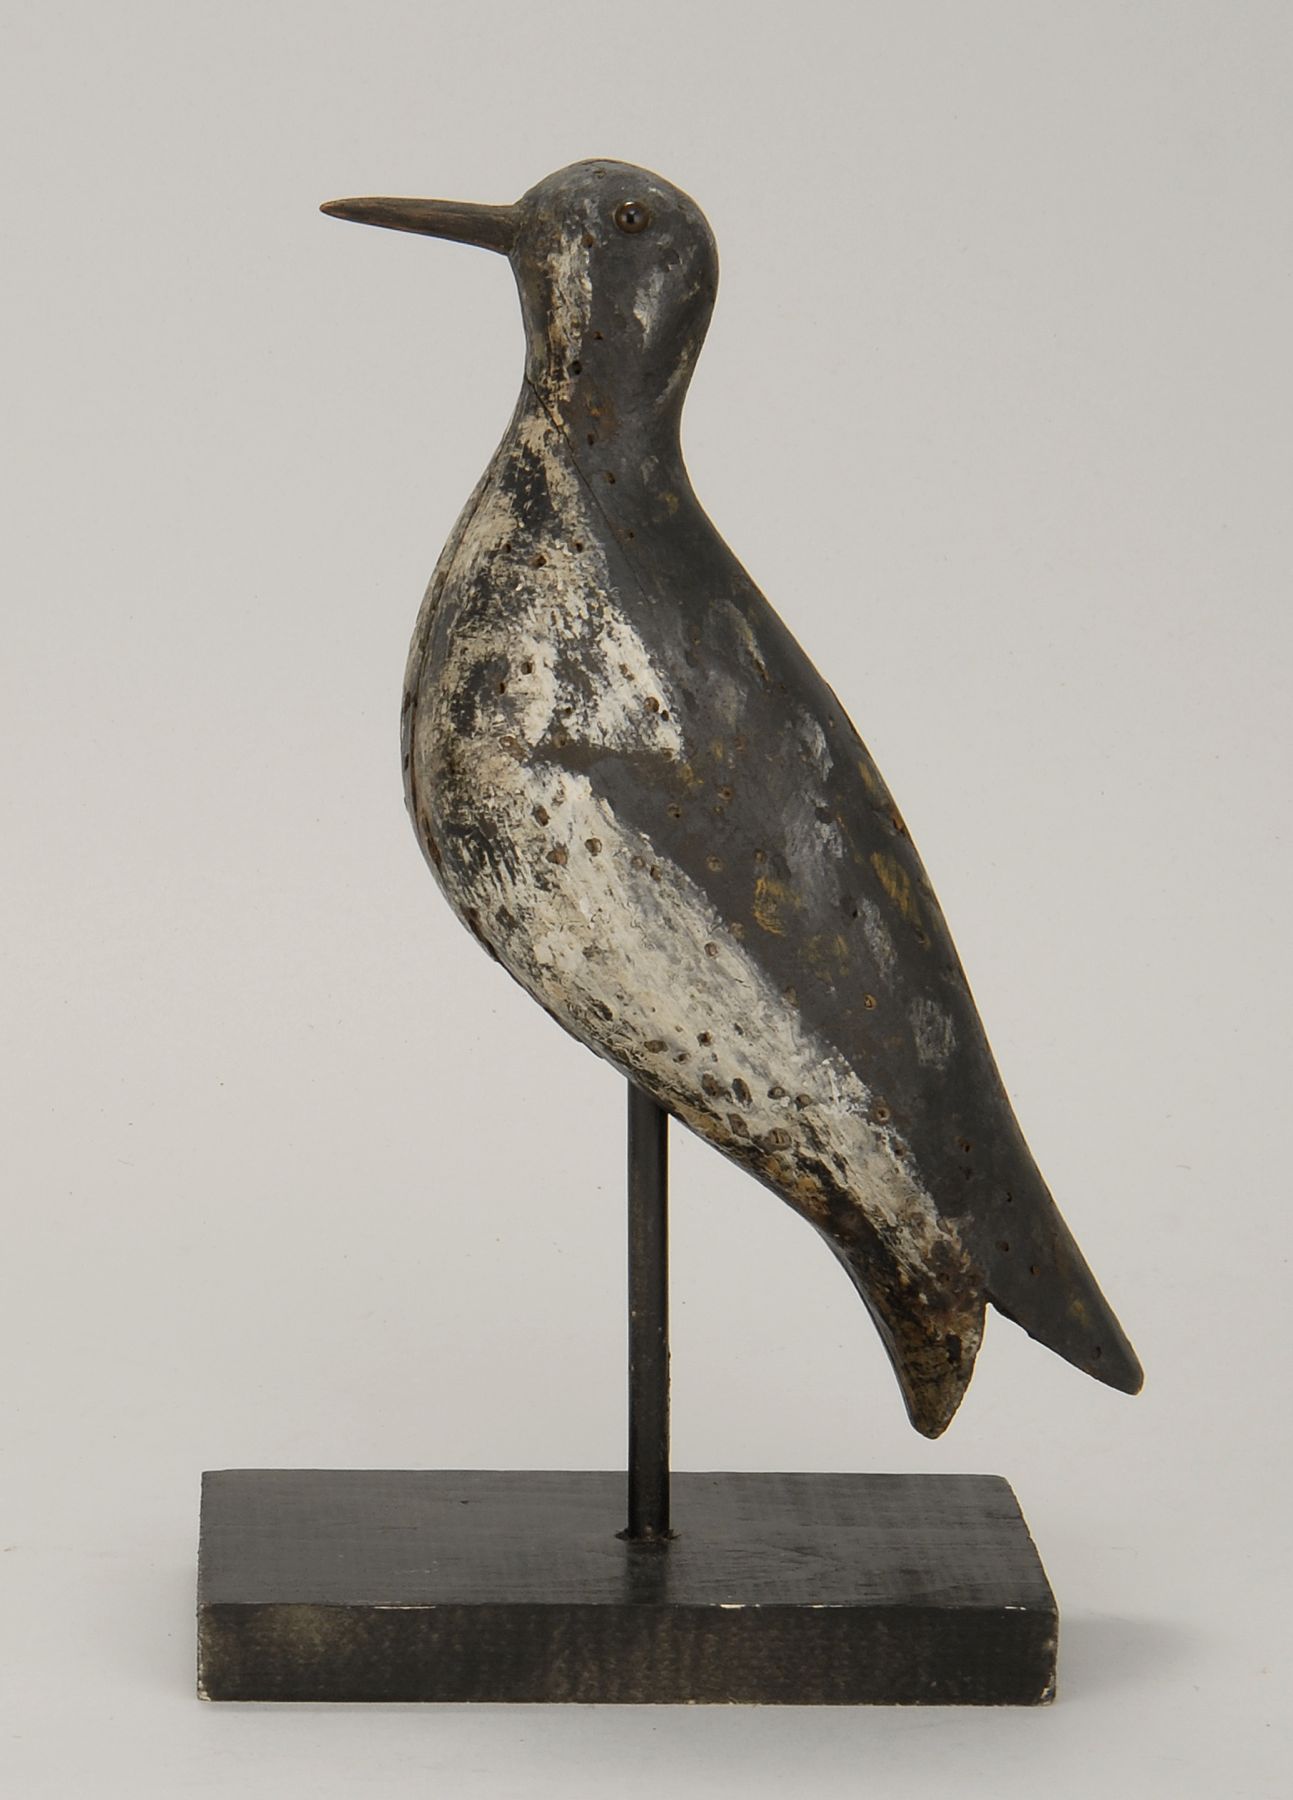 HOLLOW-CARVED PLOVER DECOYFrom